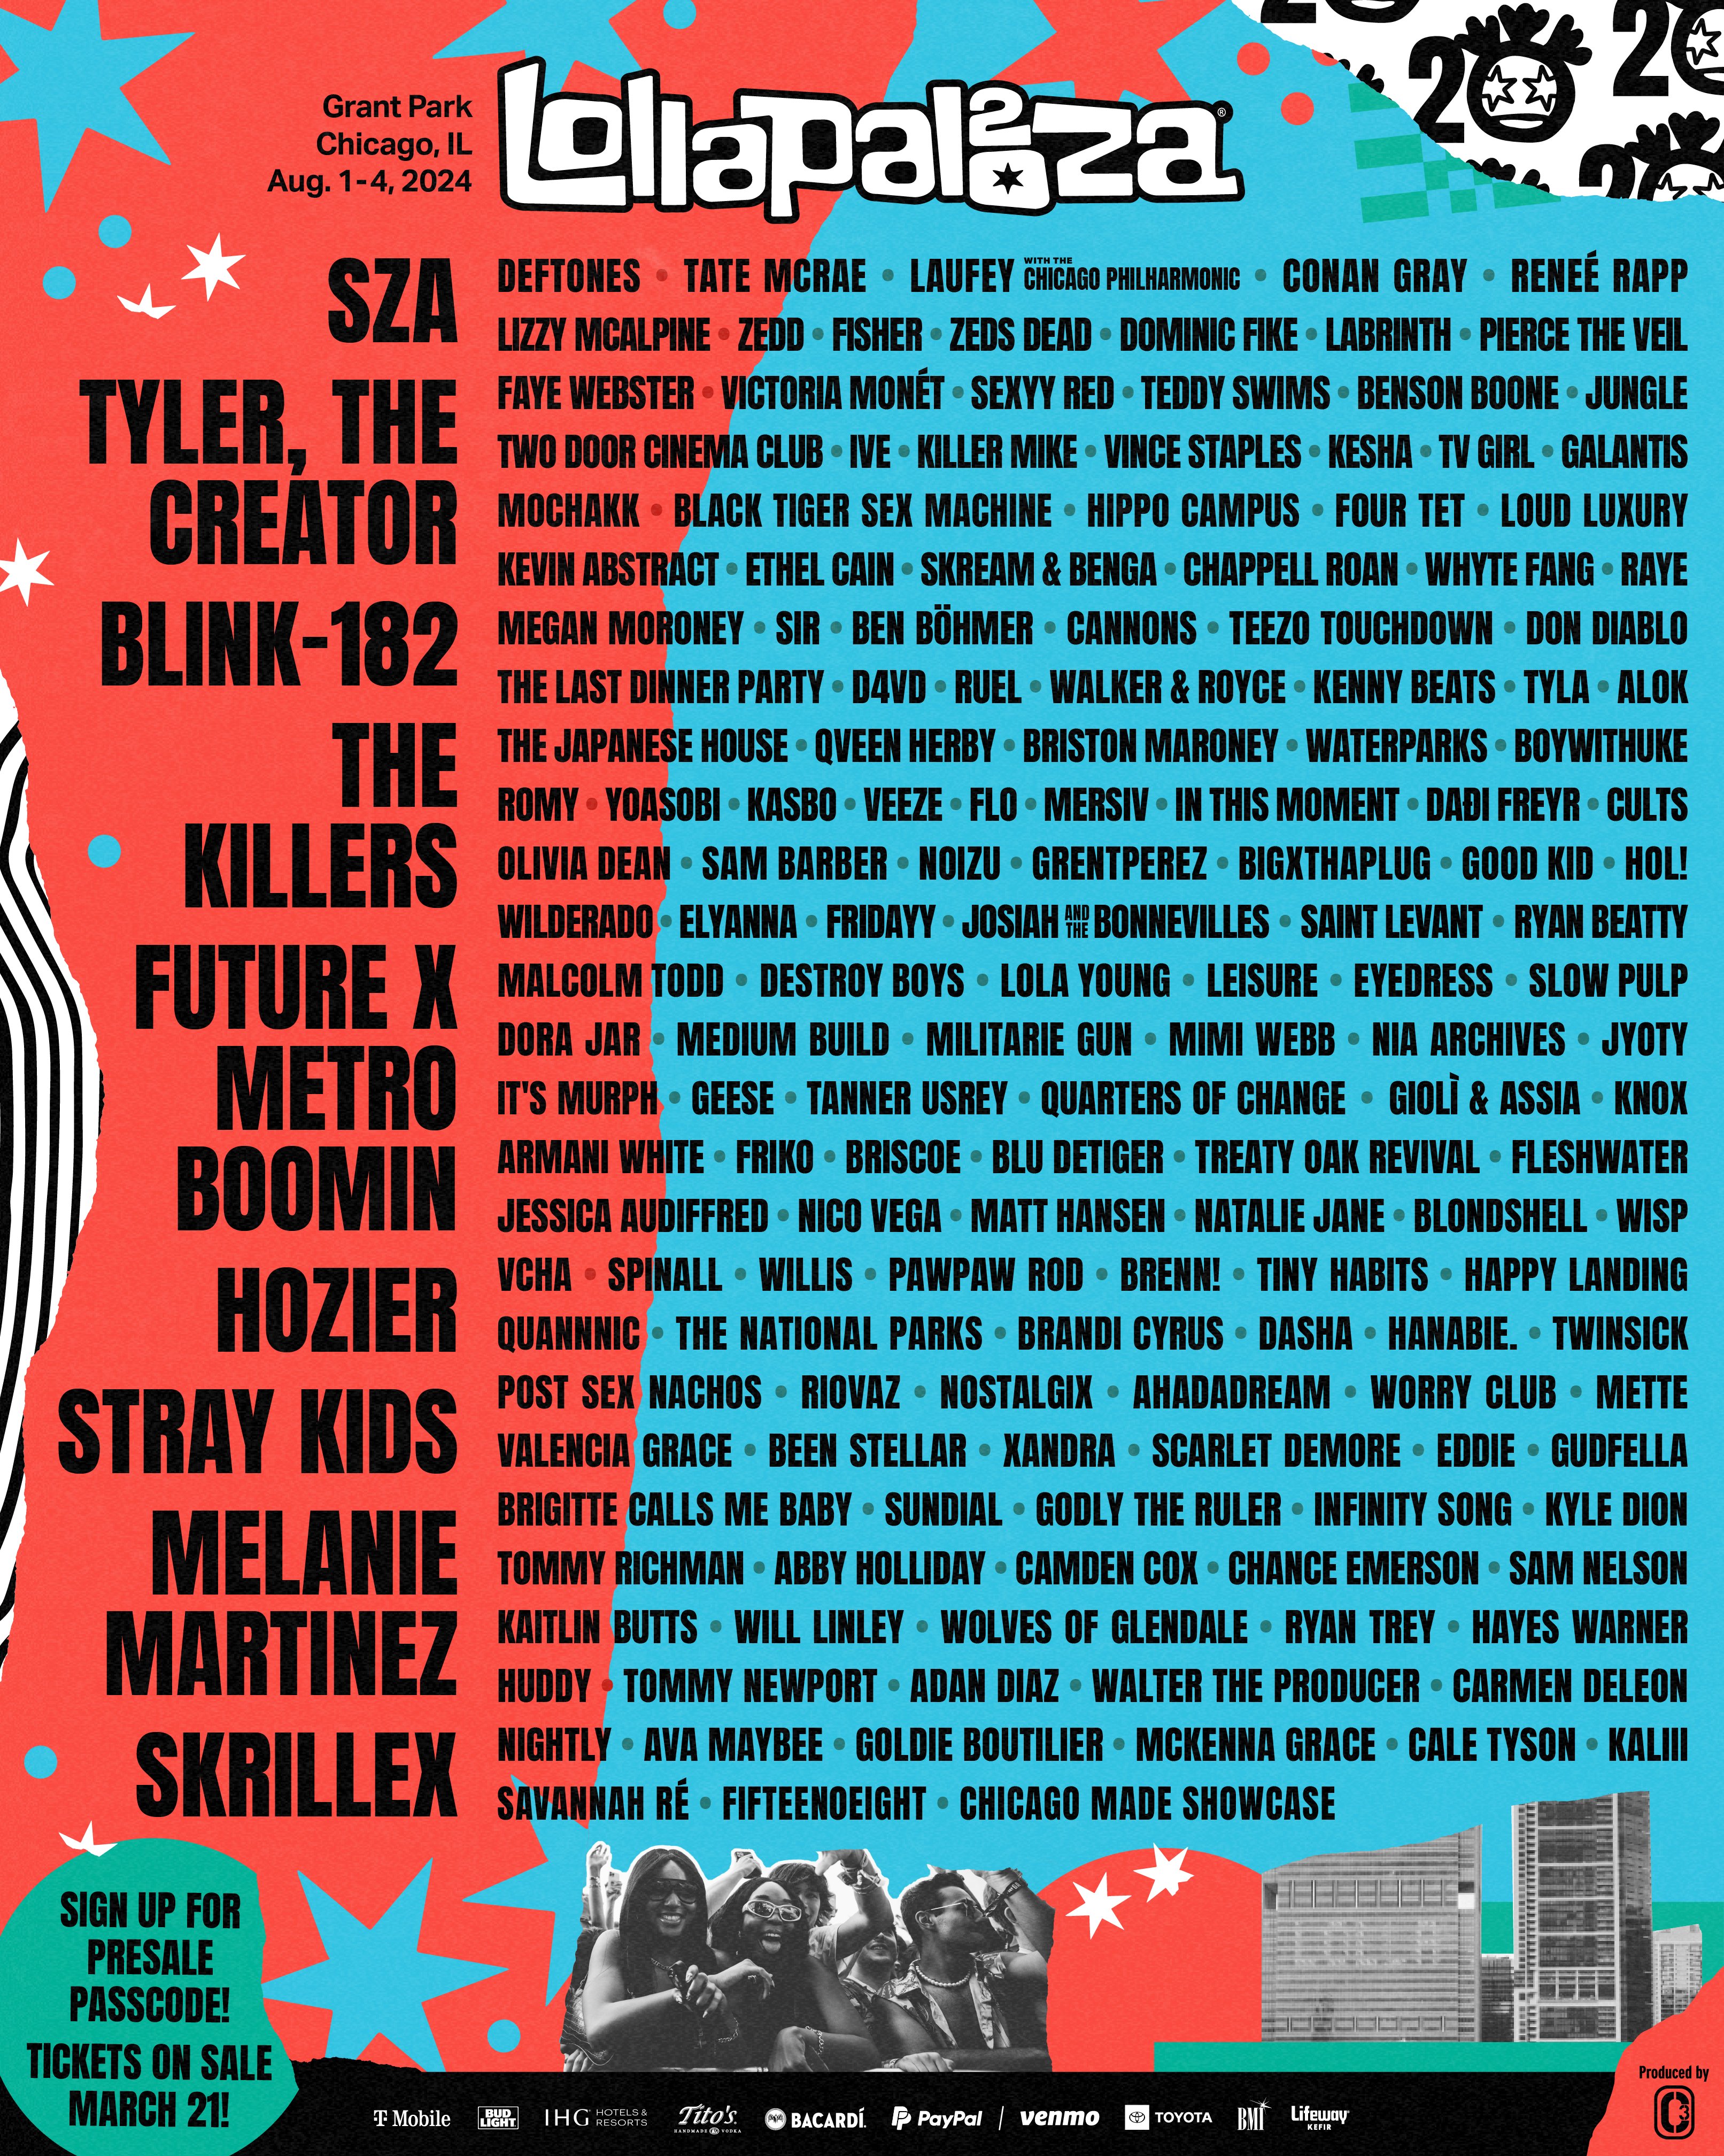 Stray Kids To Headline Lollapalooza 2024 + IVE And VCHA Announced For Lineup